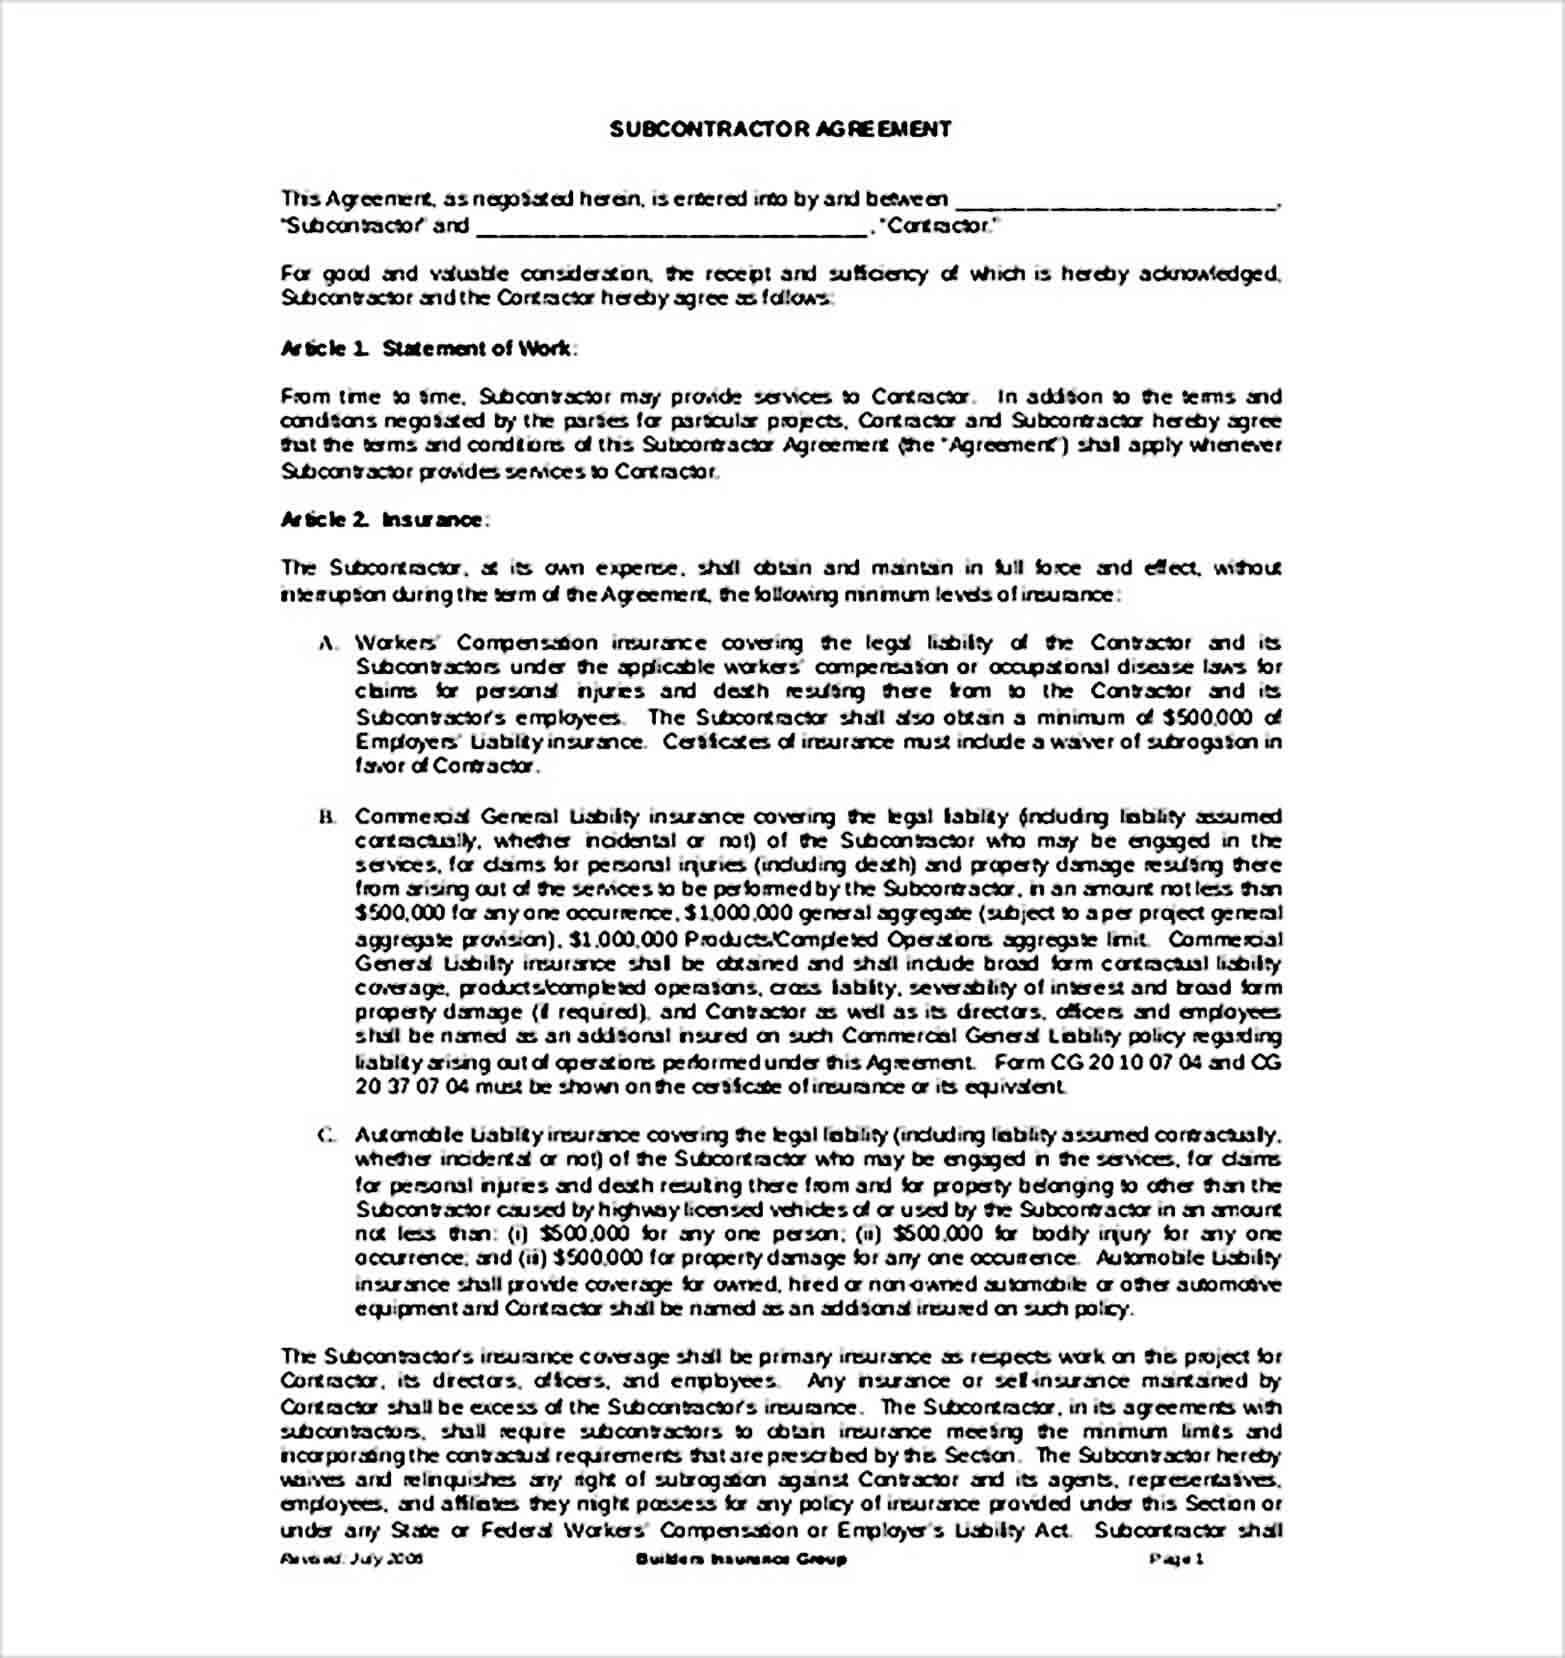 Independent Contractor Agreement Form